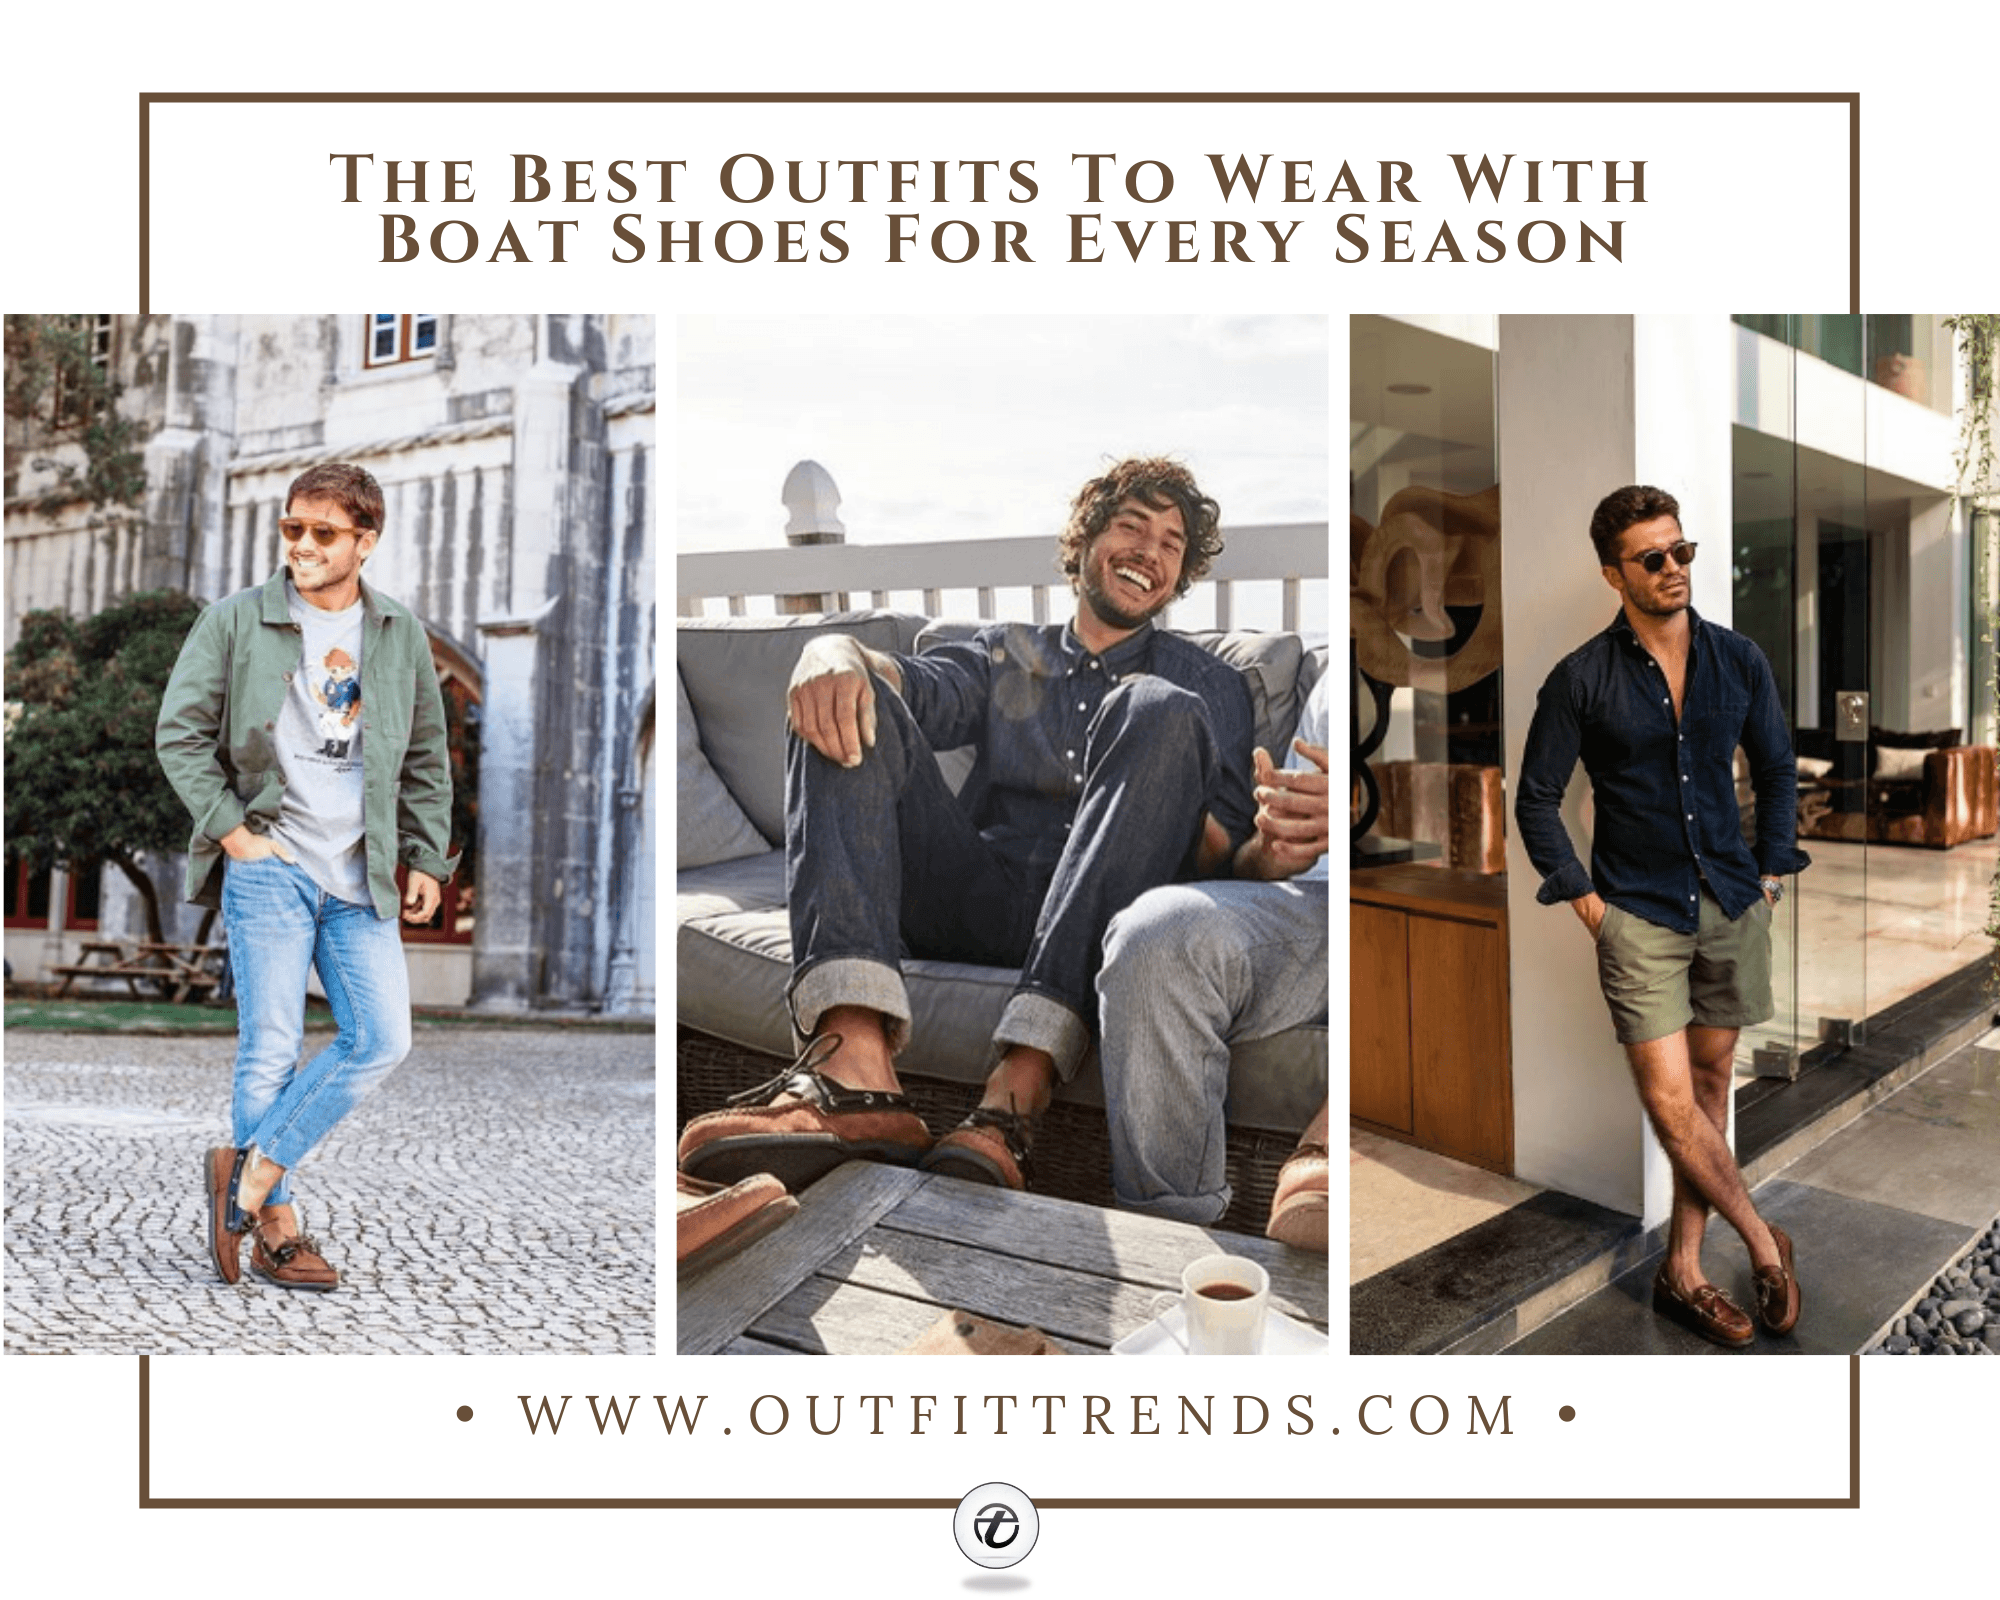 Men Boat Shoe Outfits – 31 Ideas On How To Wear Boat Shoes